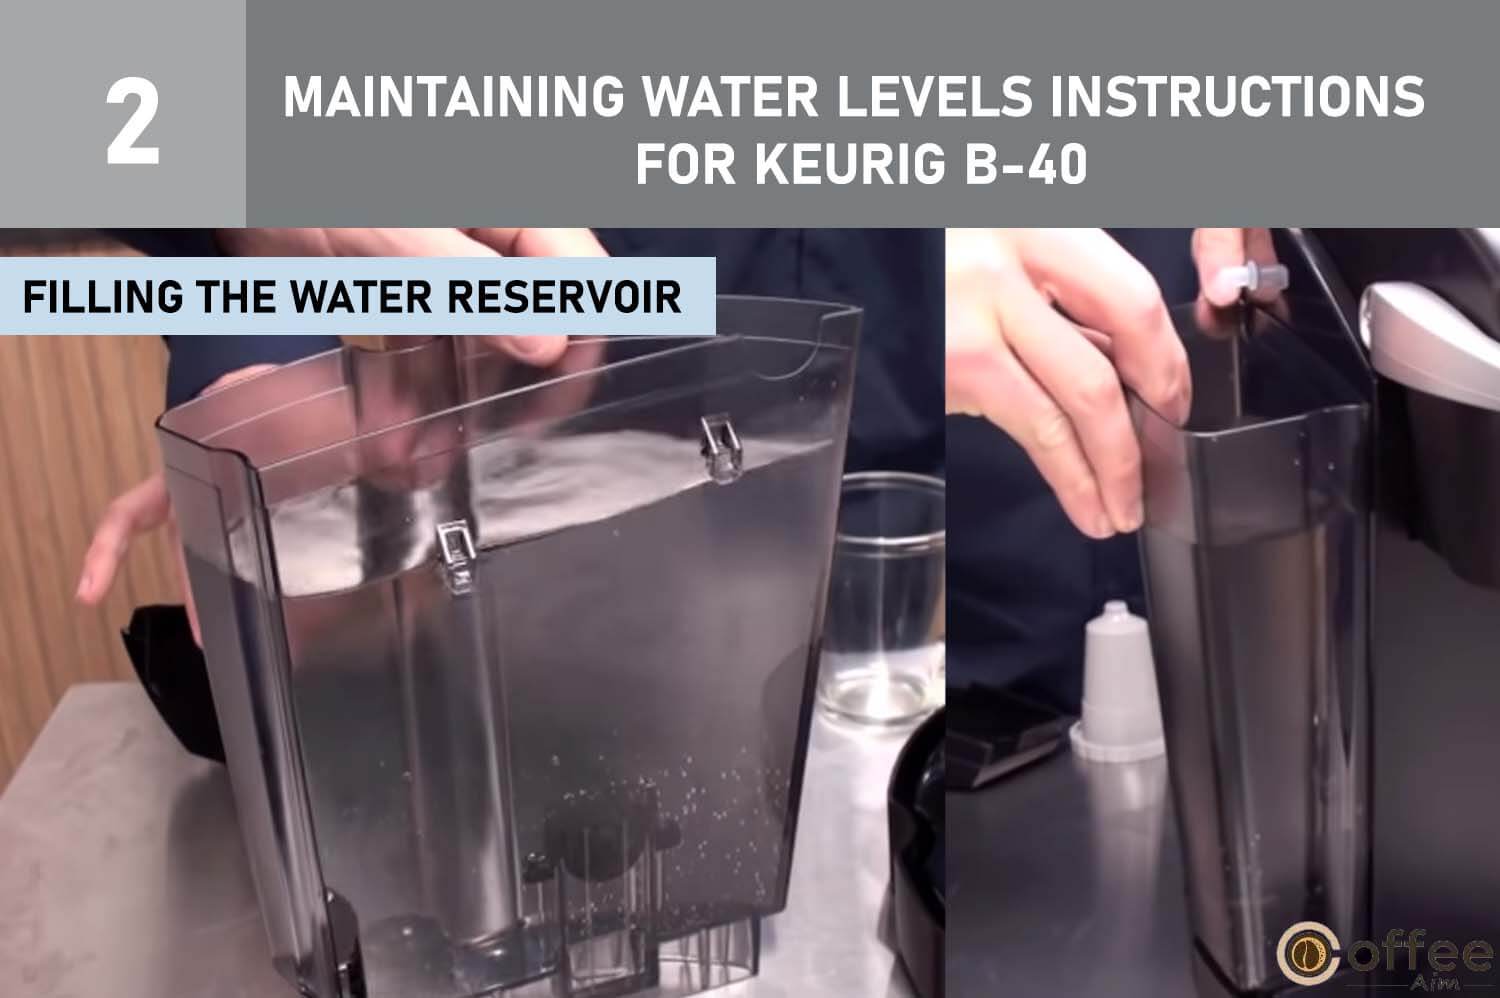 This illustrative image portrays the process of "Filling the Water Reservoir," an integral step outlined in the section titled "Maintaining Water Levels: Instructions for Keurig B-40" within the comprehensive article "How to Use Keurig B-40